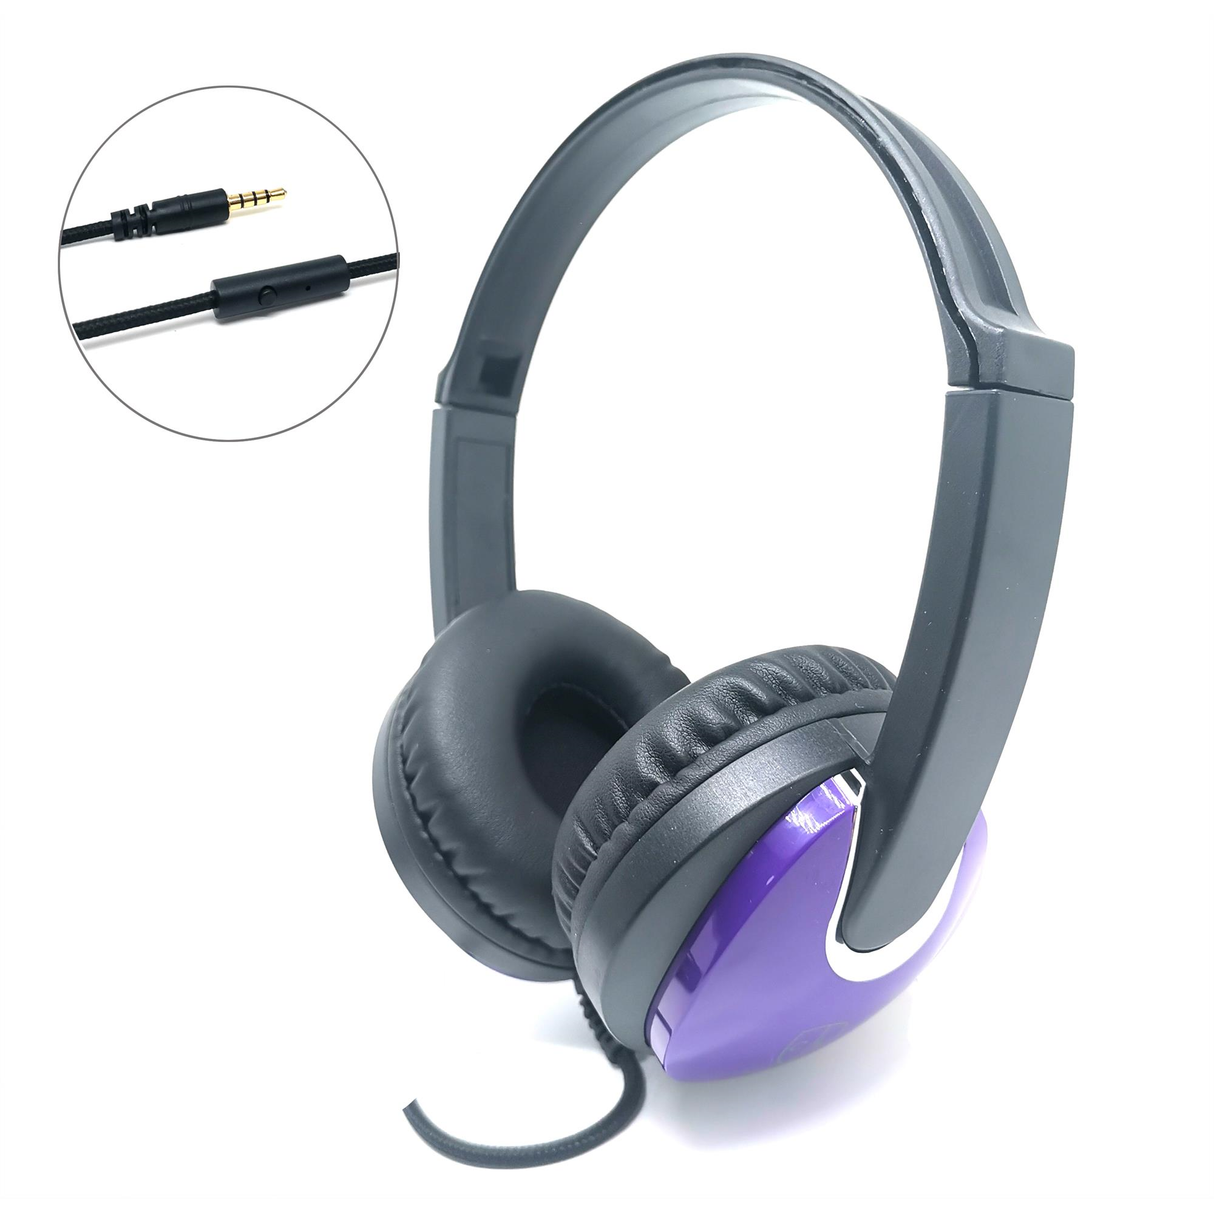 Quality Headphone with microphone, braided cable and 4 Pole connector -  Purple